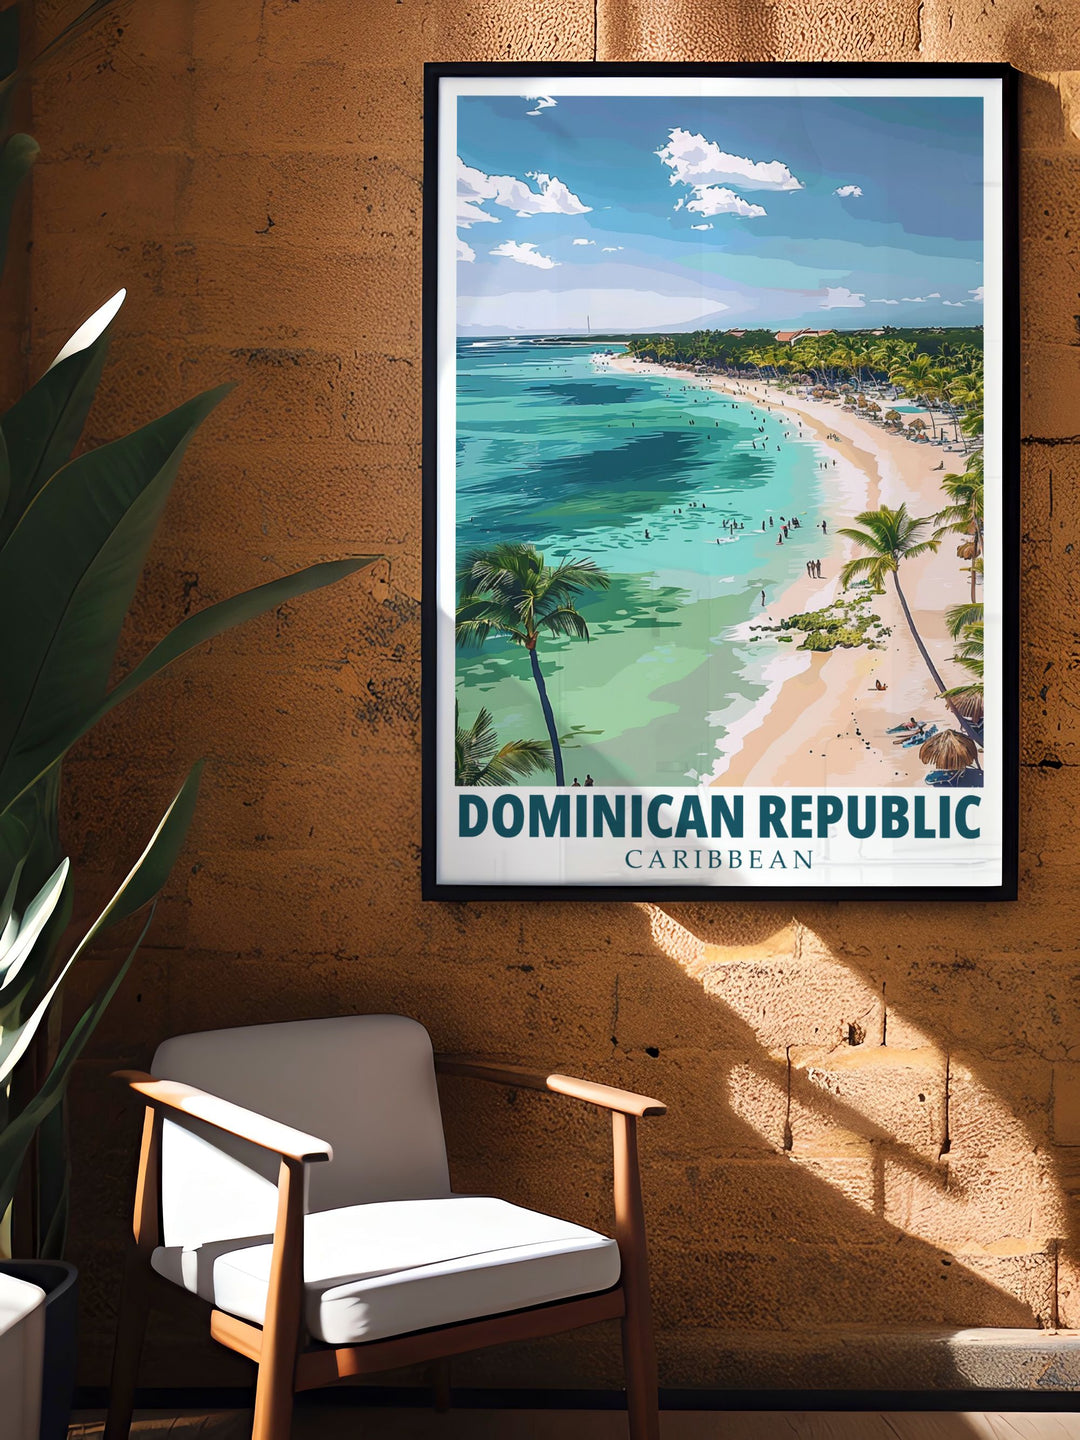 Personalized gift featuring Punta Cana perfect for birthdays anniversaries Christmas and special occasions for those who love the Caribbean and travel